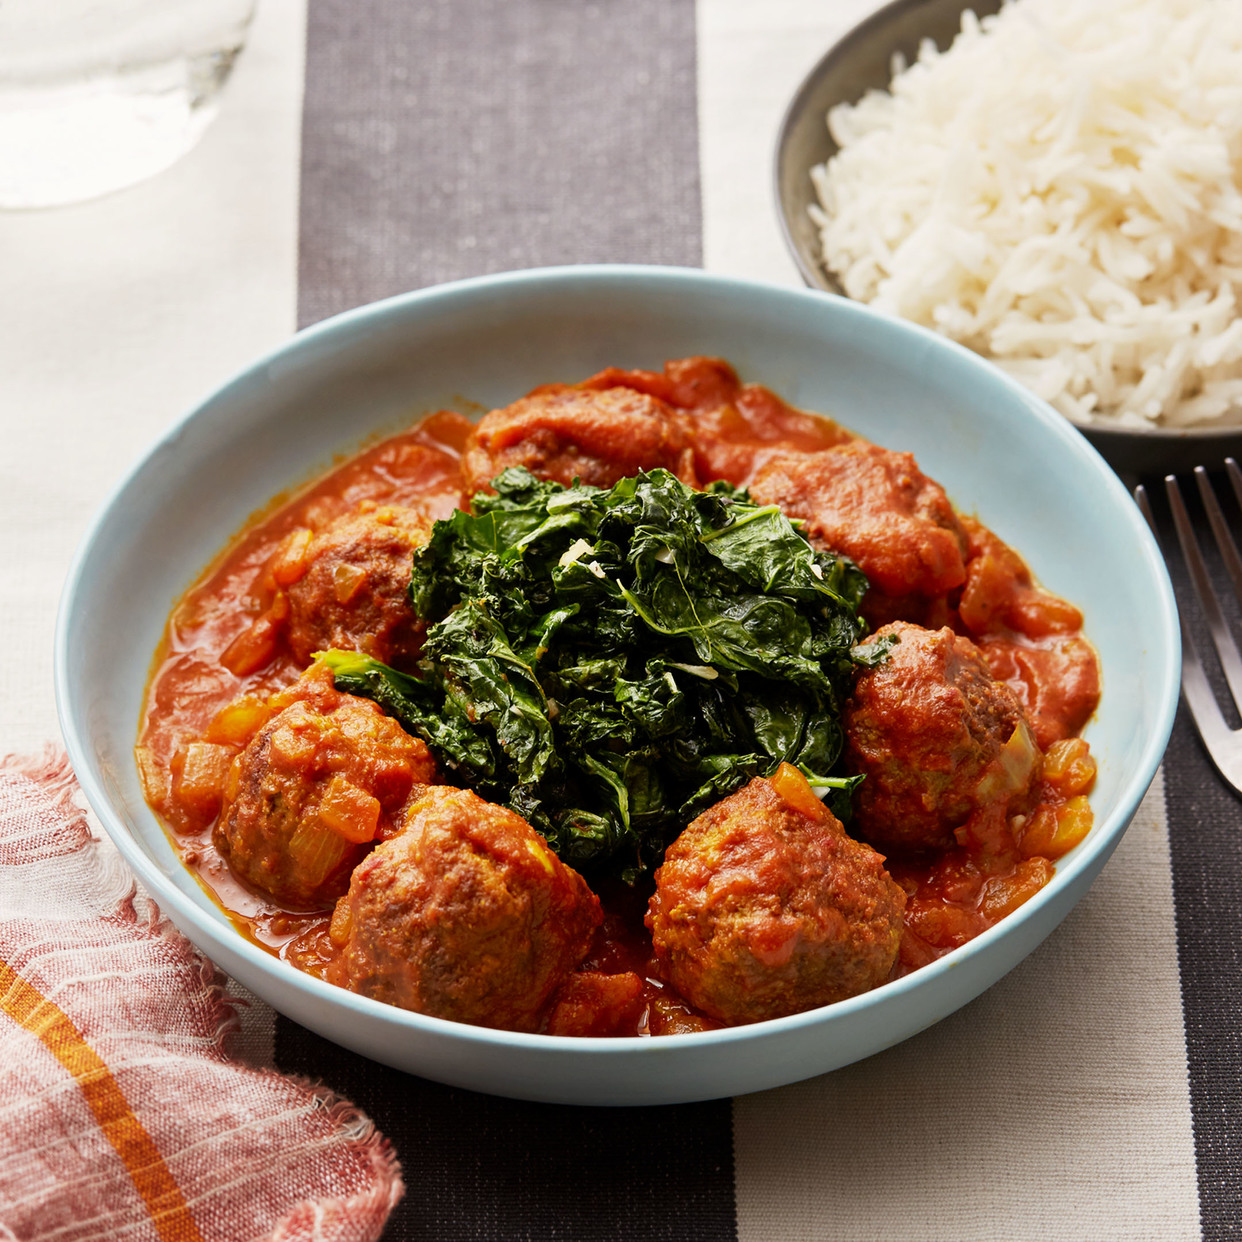 Meatballs in spicy tomato